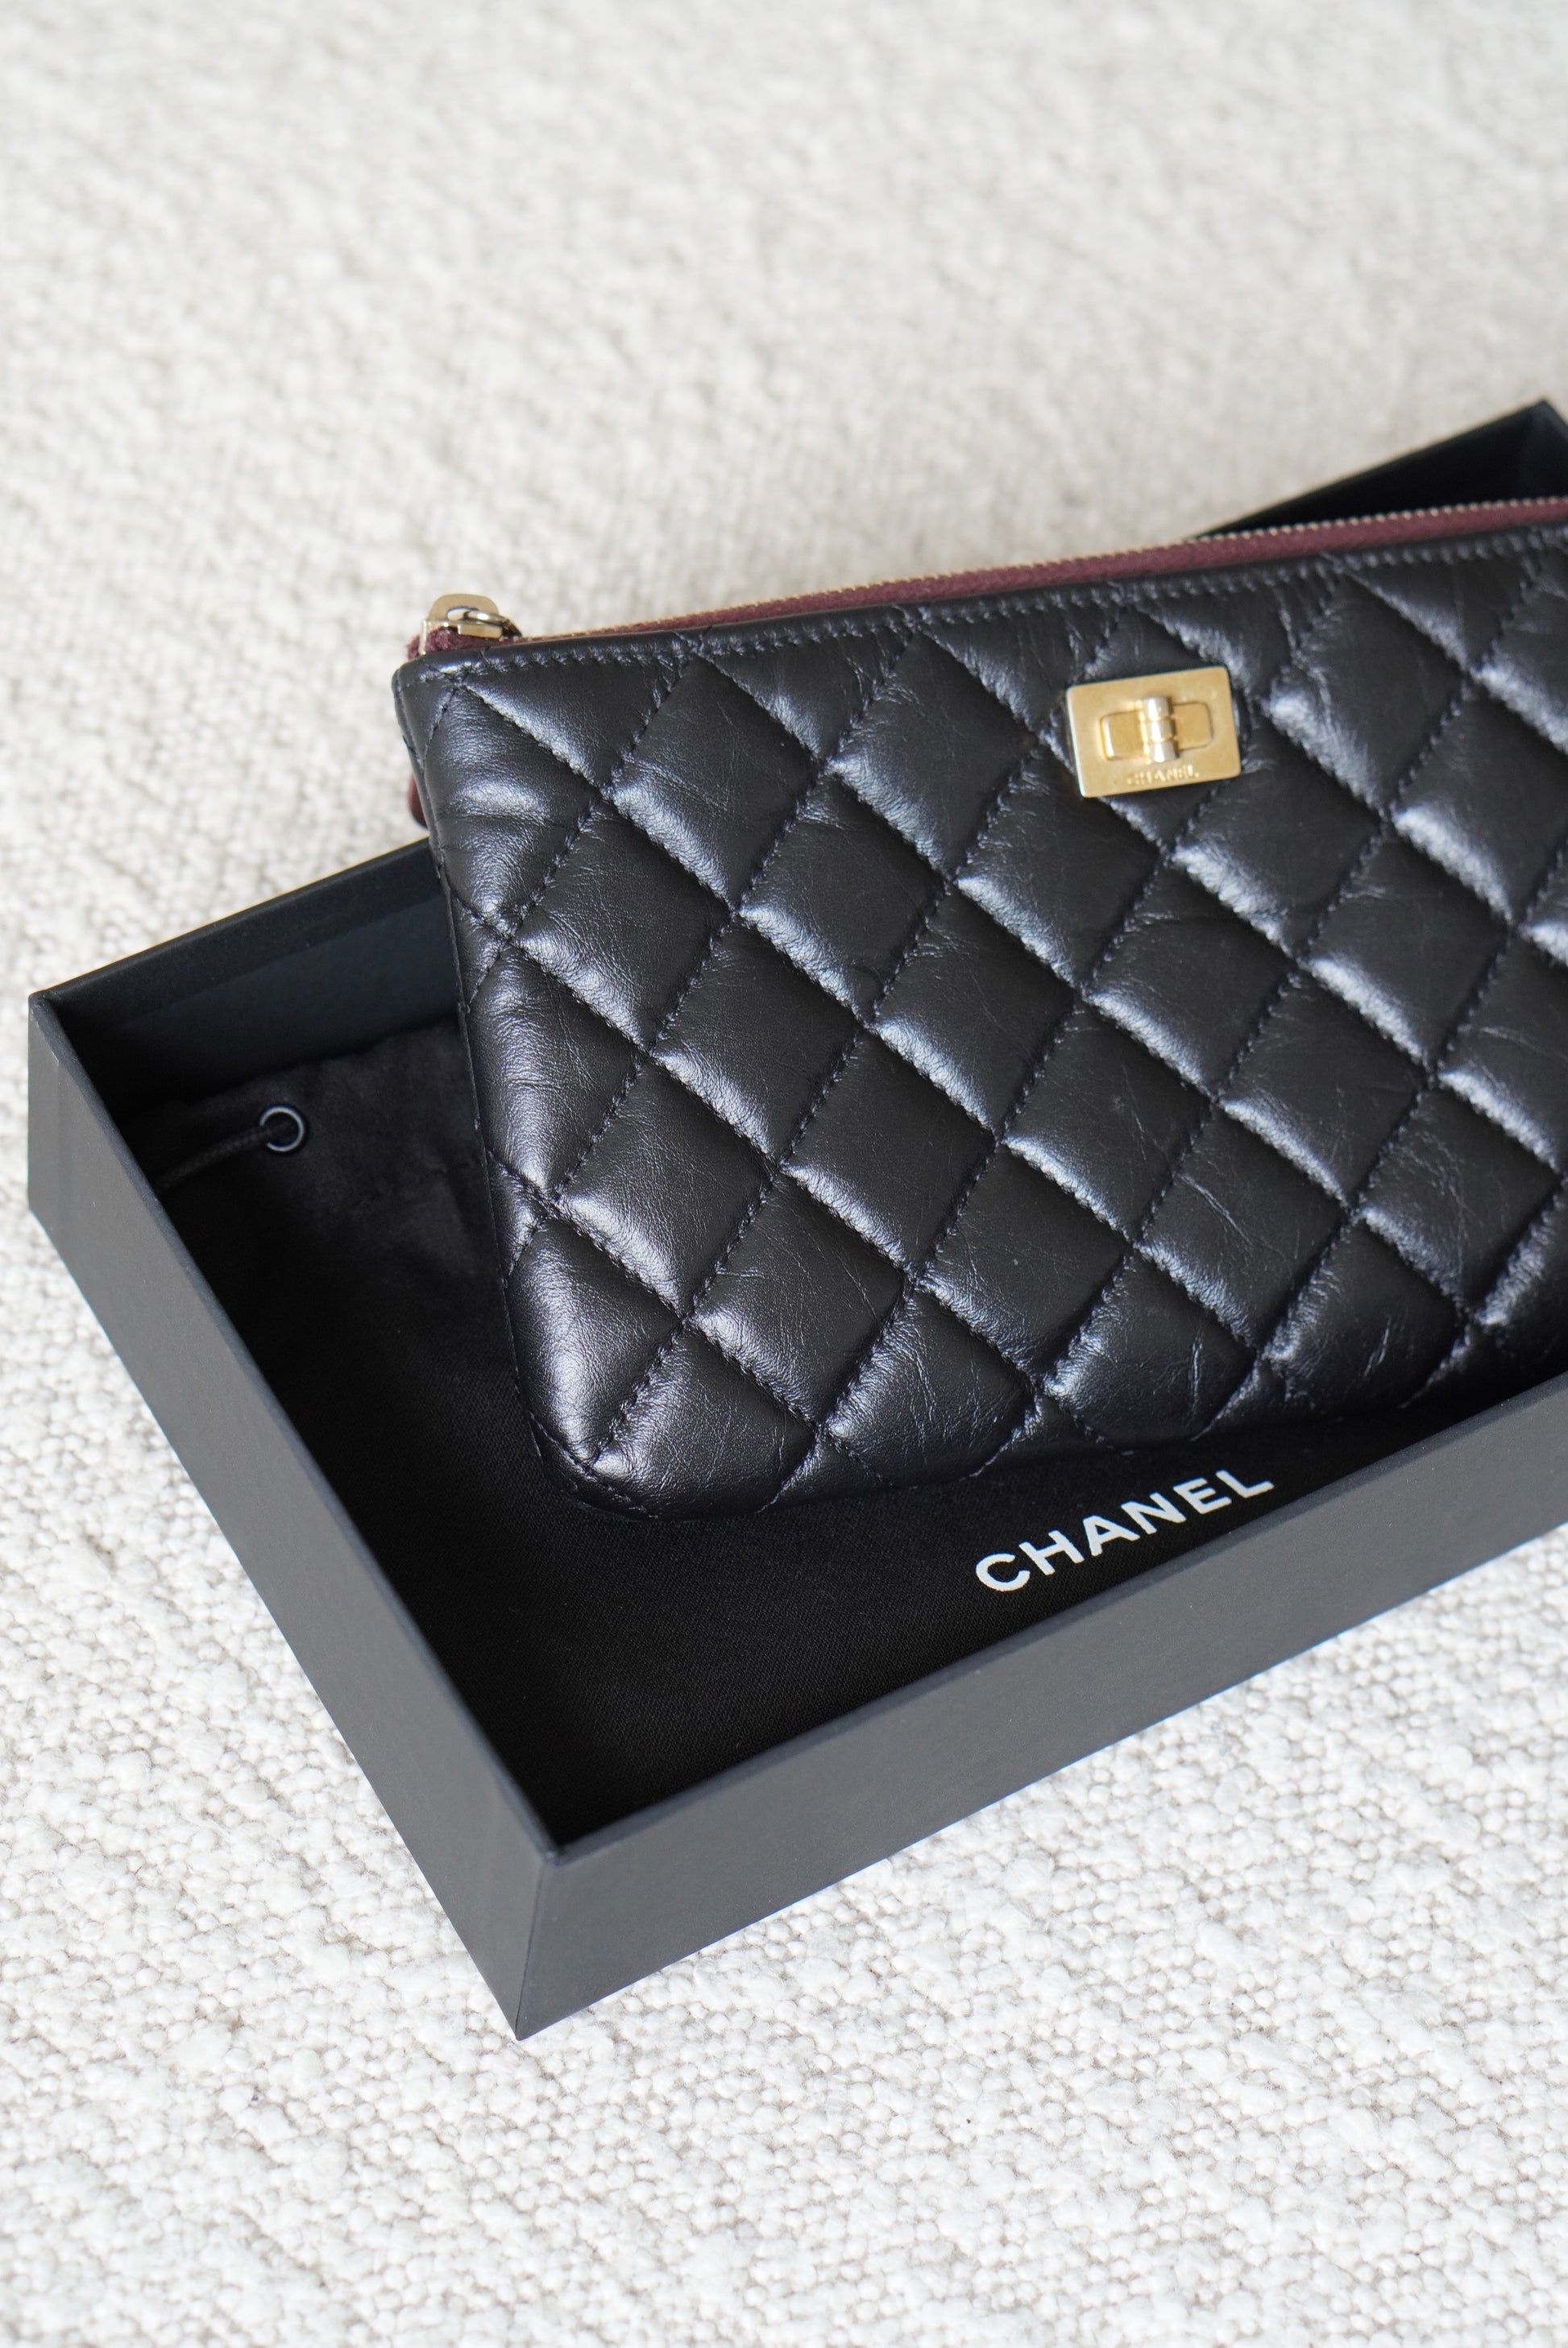 Chanel Black Quilted Leather Reissue 2.55 Zip Flap Card Holder at